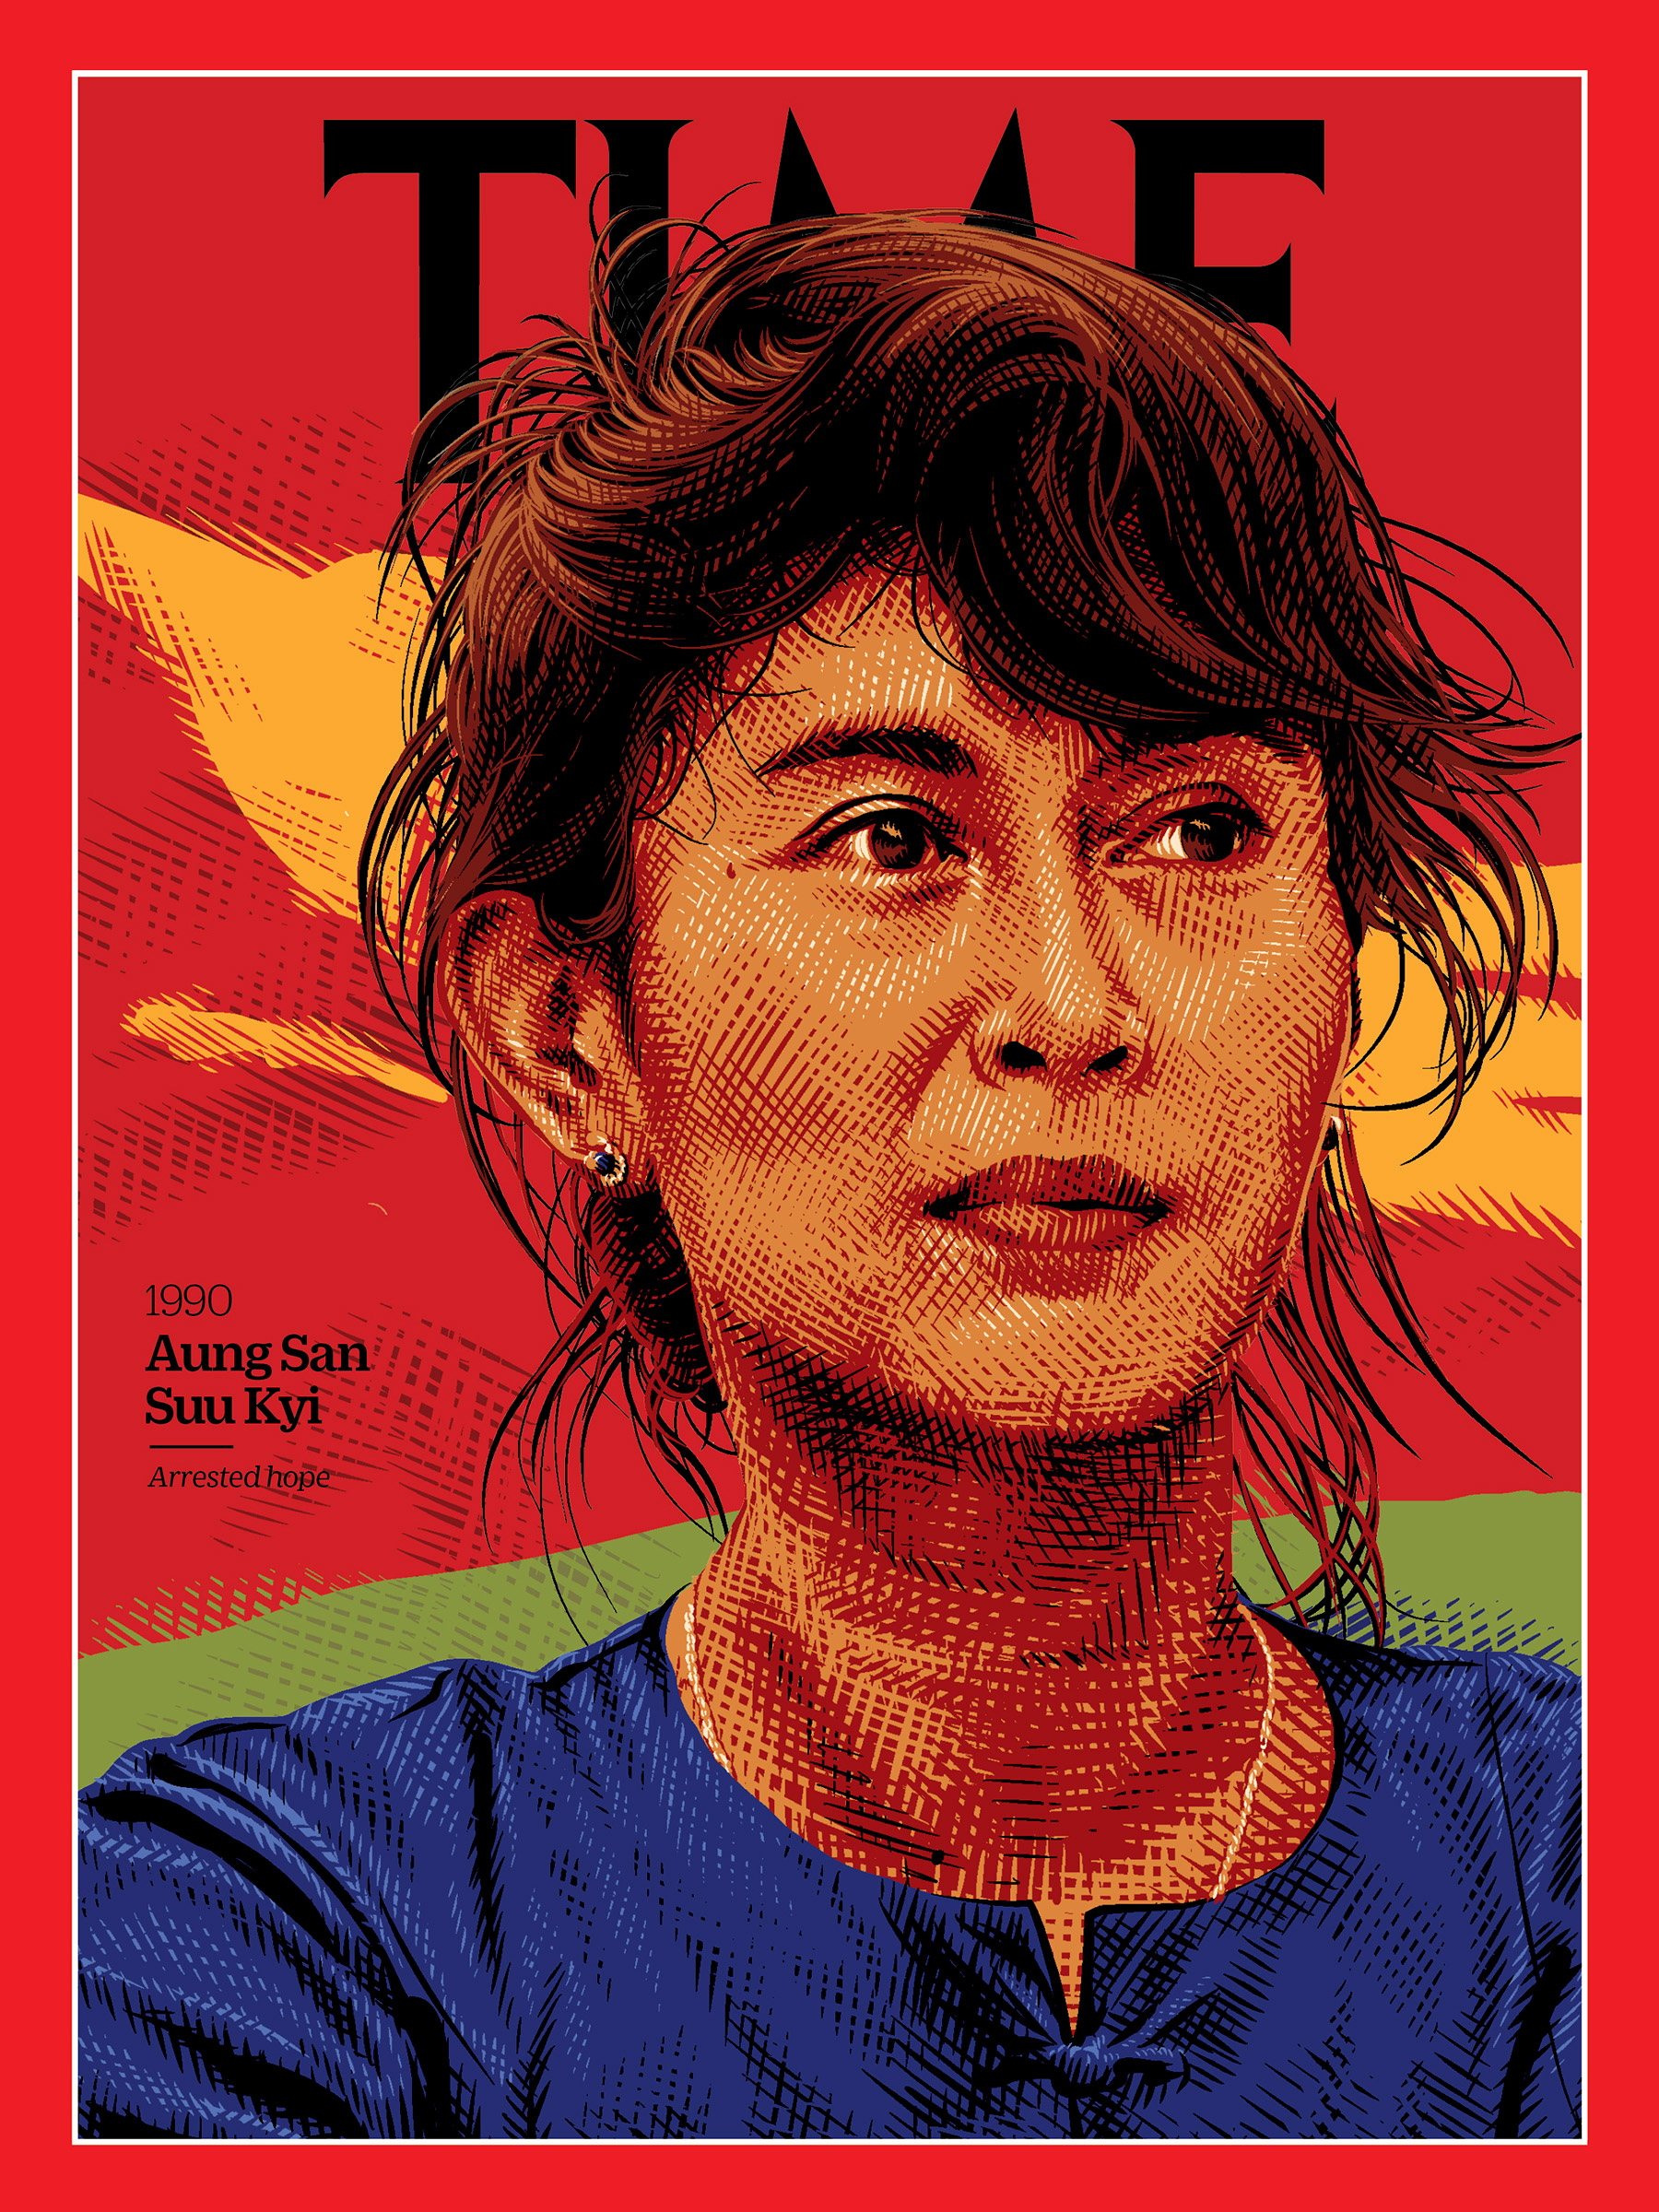 <a href="https://fineartamerica.com/featured/anna-san-suu-kyi-1990-time.html"><strong>Buy the cover art→</strong></a> (Illustration by Tracie Ching for TIME; Sandro Tucci—The LIFE Images Collection/Getty)